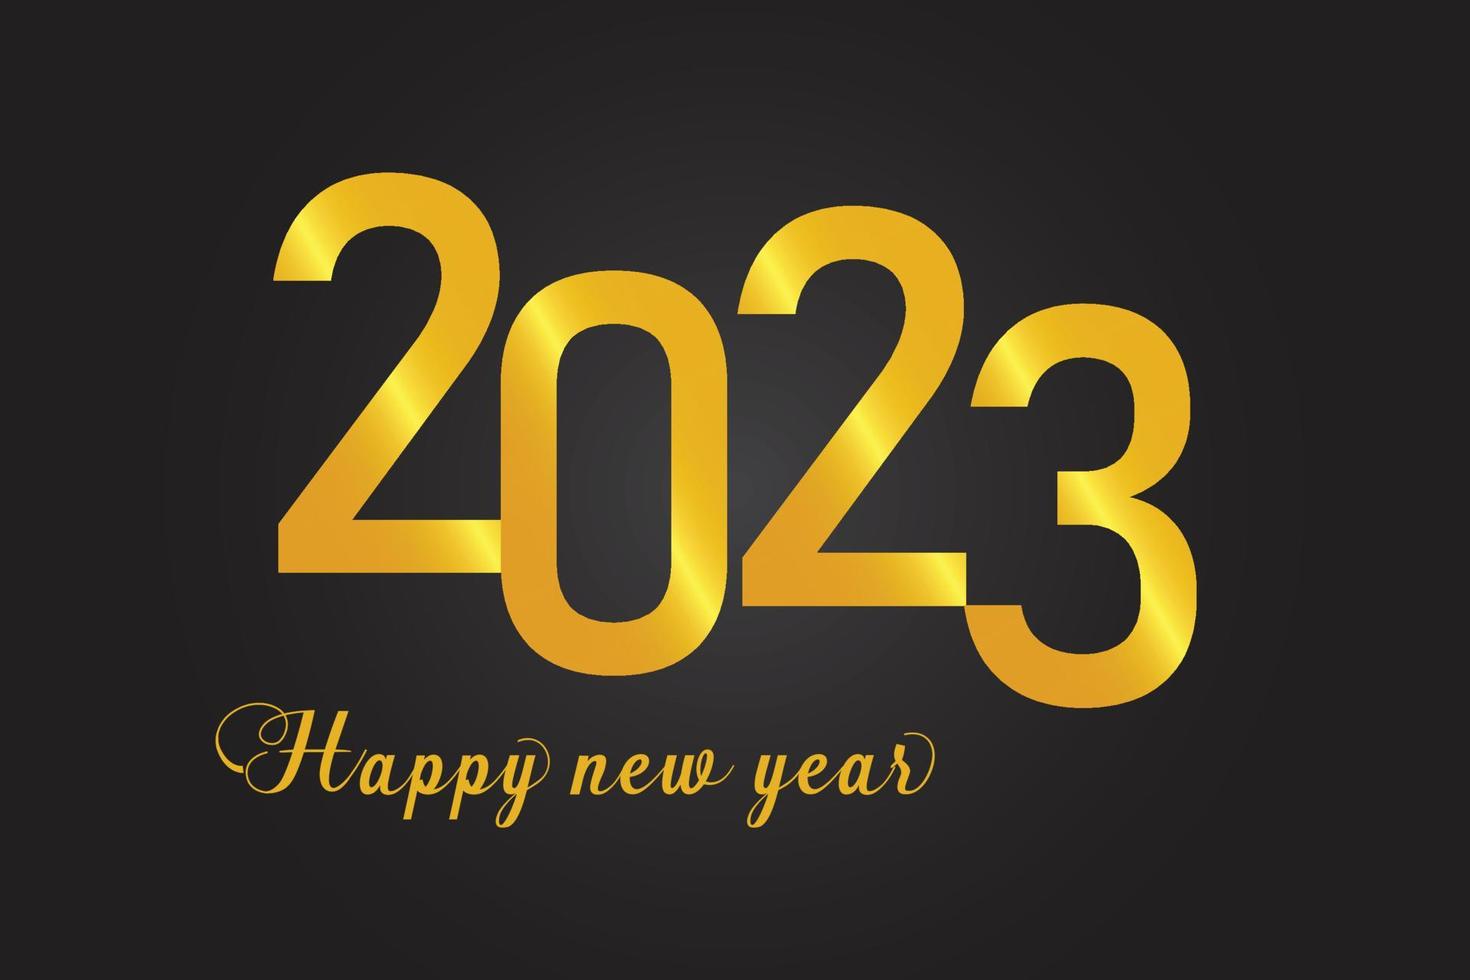 Celebration of happy new year 2023 gold greeting poster design vector